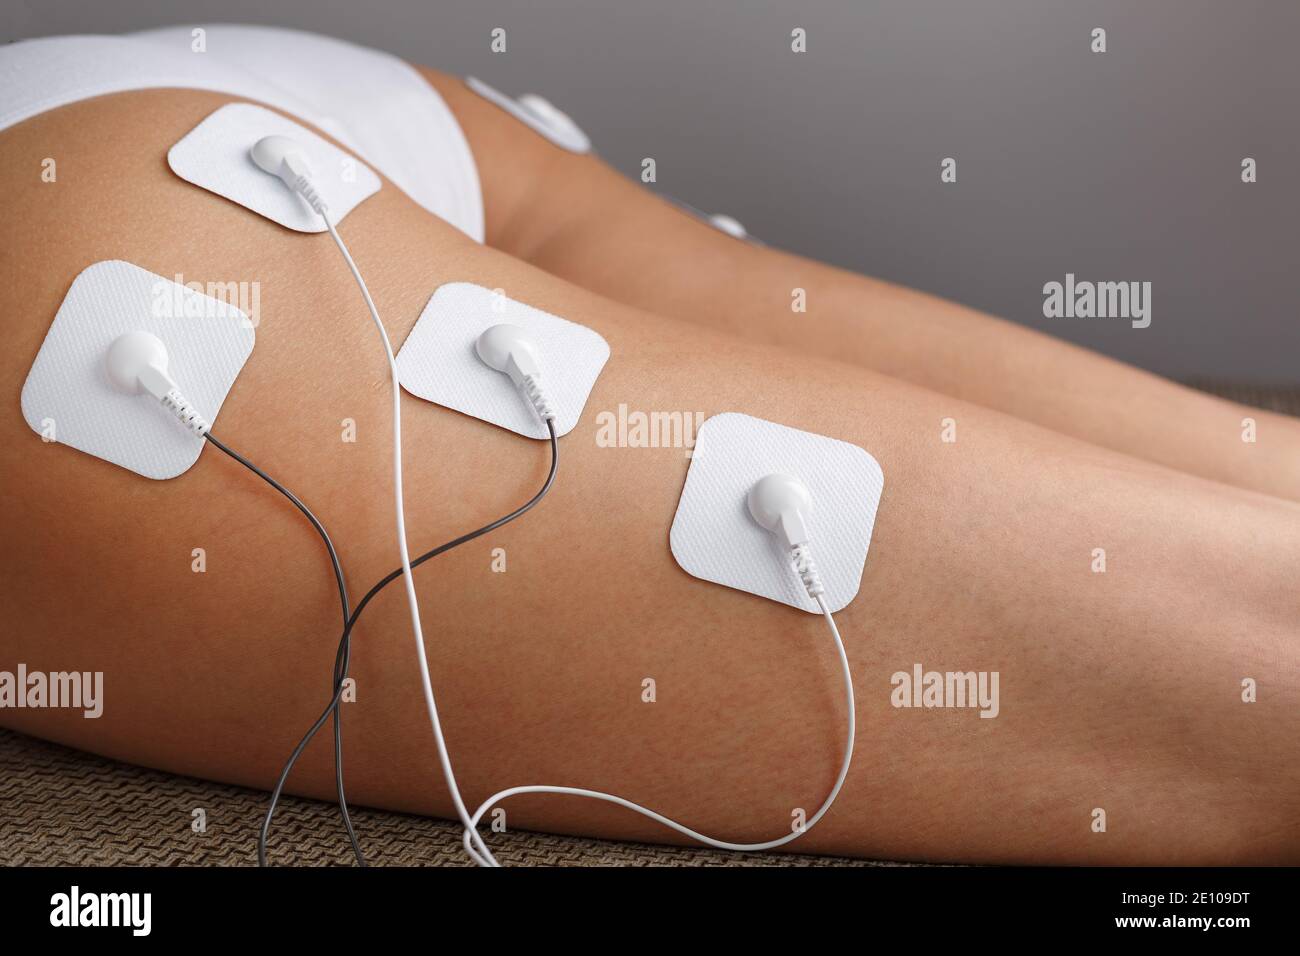 https://c8.alamy.com/comp/2E109DT/muscle-stimulator-with-electrodes-the-massager-on-the-buttocks-and-legs-rehabilitation-and-treatment-weight-loss-and-2E109DT.jpg